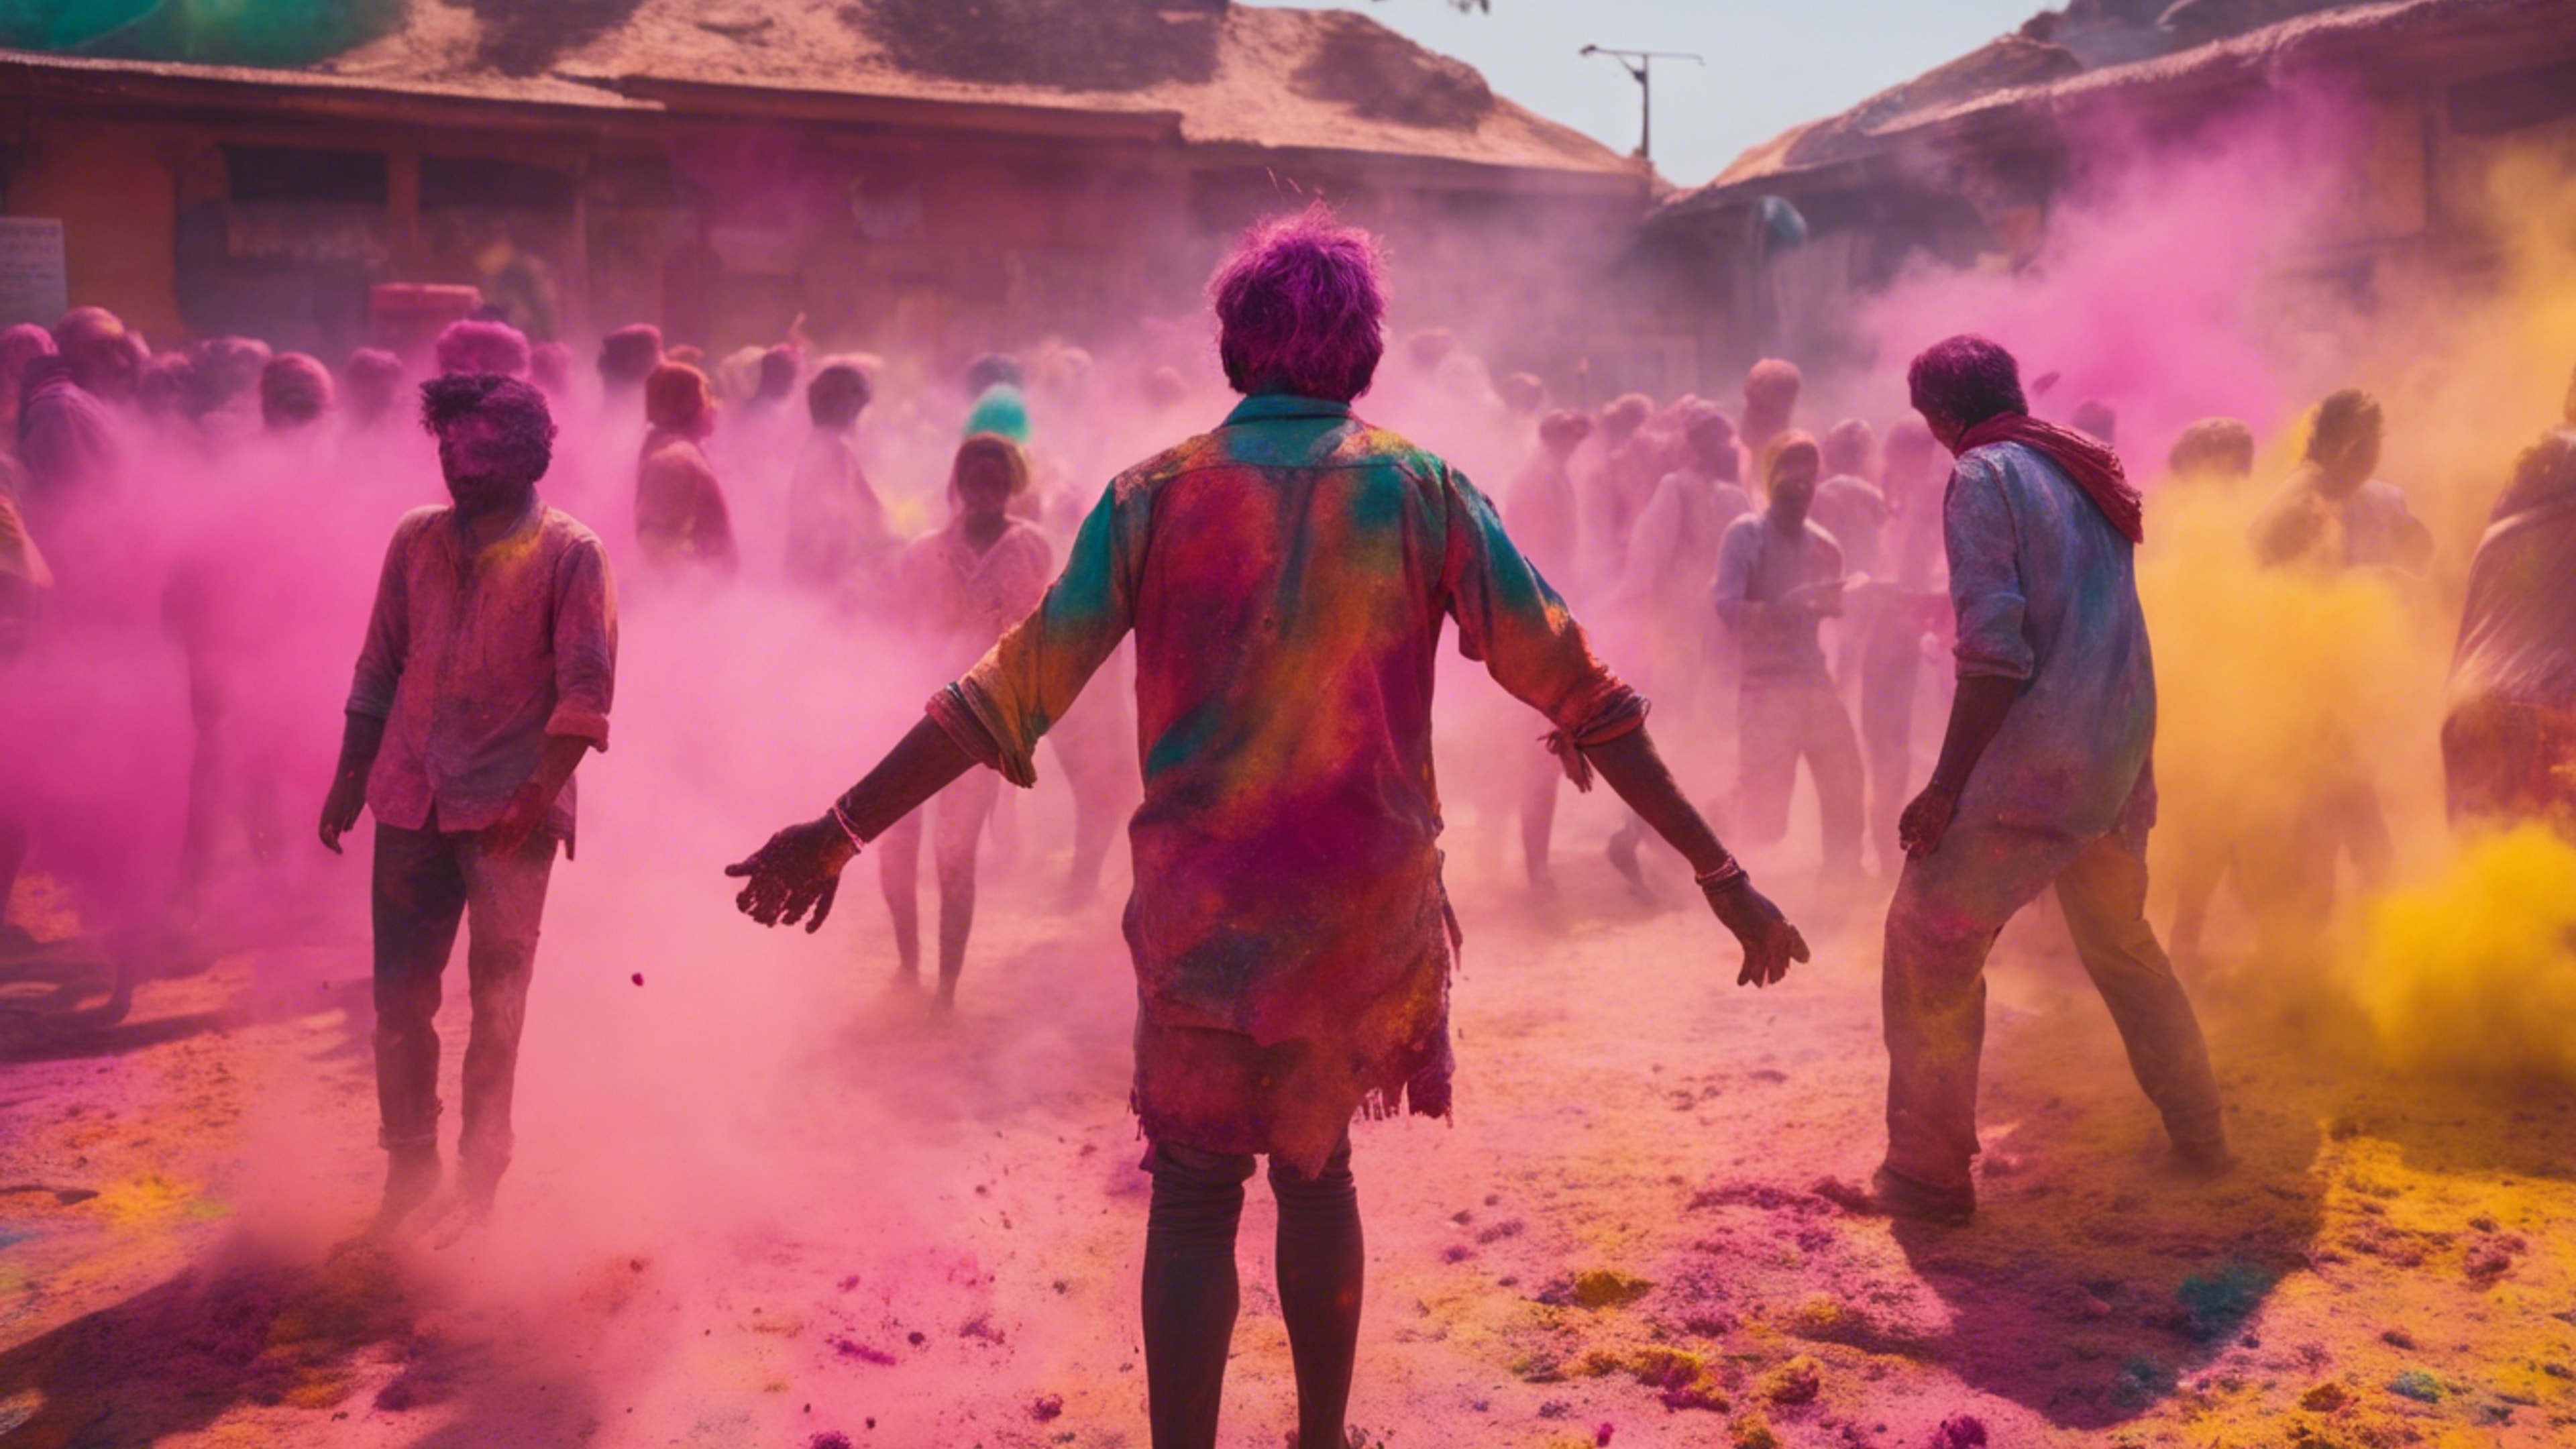 A vibrant and colorful Holi festival with people throwing powdered colors and laughing in the backdrop of an old Indian city. Wallpaper[6dae05cbdf264a67bd16]